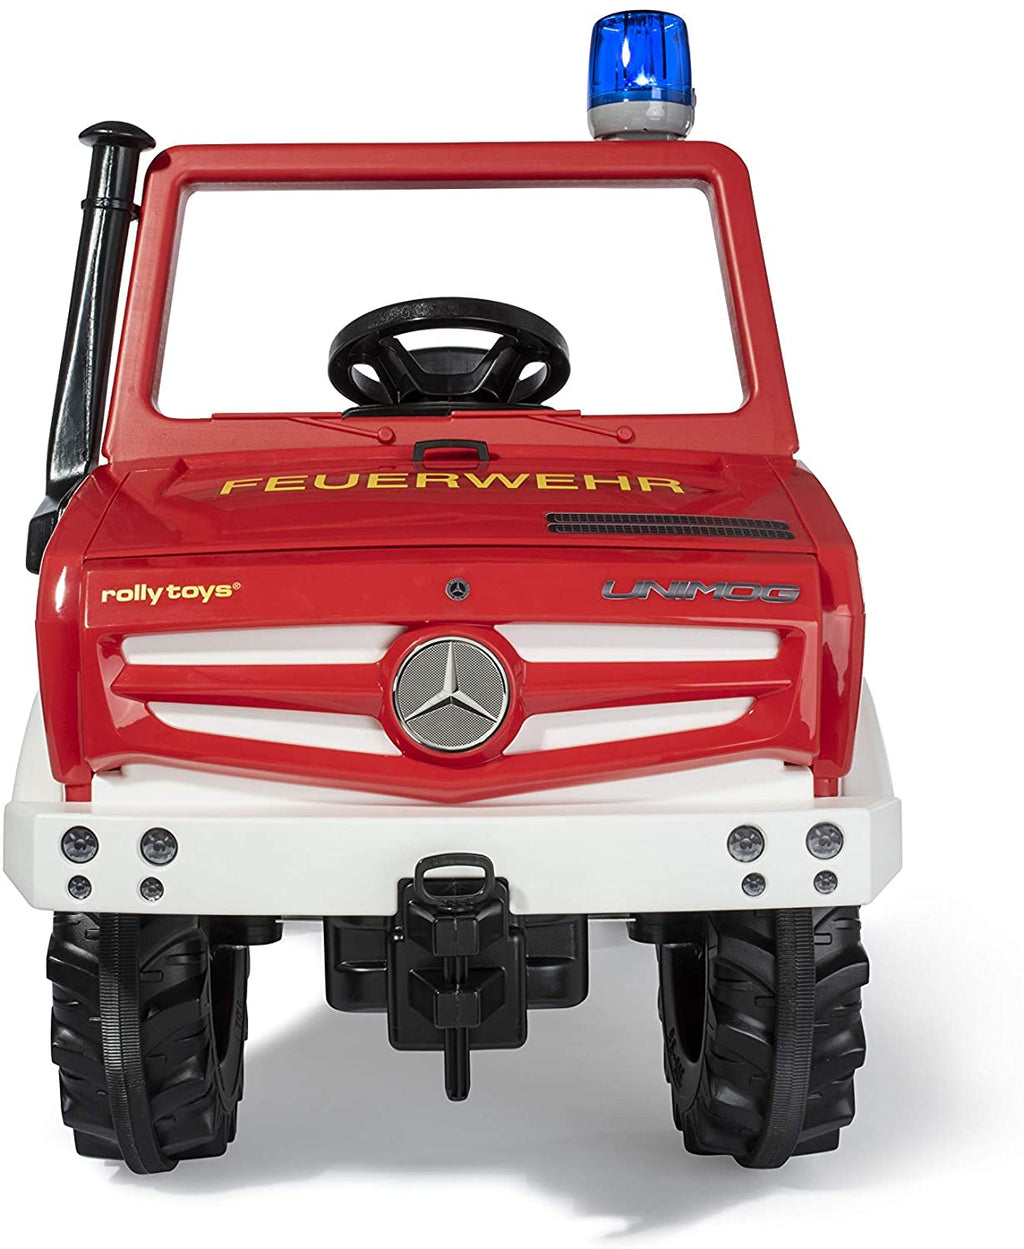 Rolly Toys trapvoertuig RollyUnimog Fire 118 x 81 x 54 rood - Outdoor ontspanning